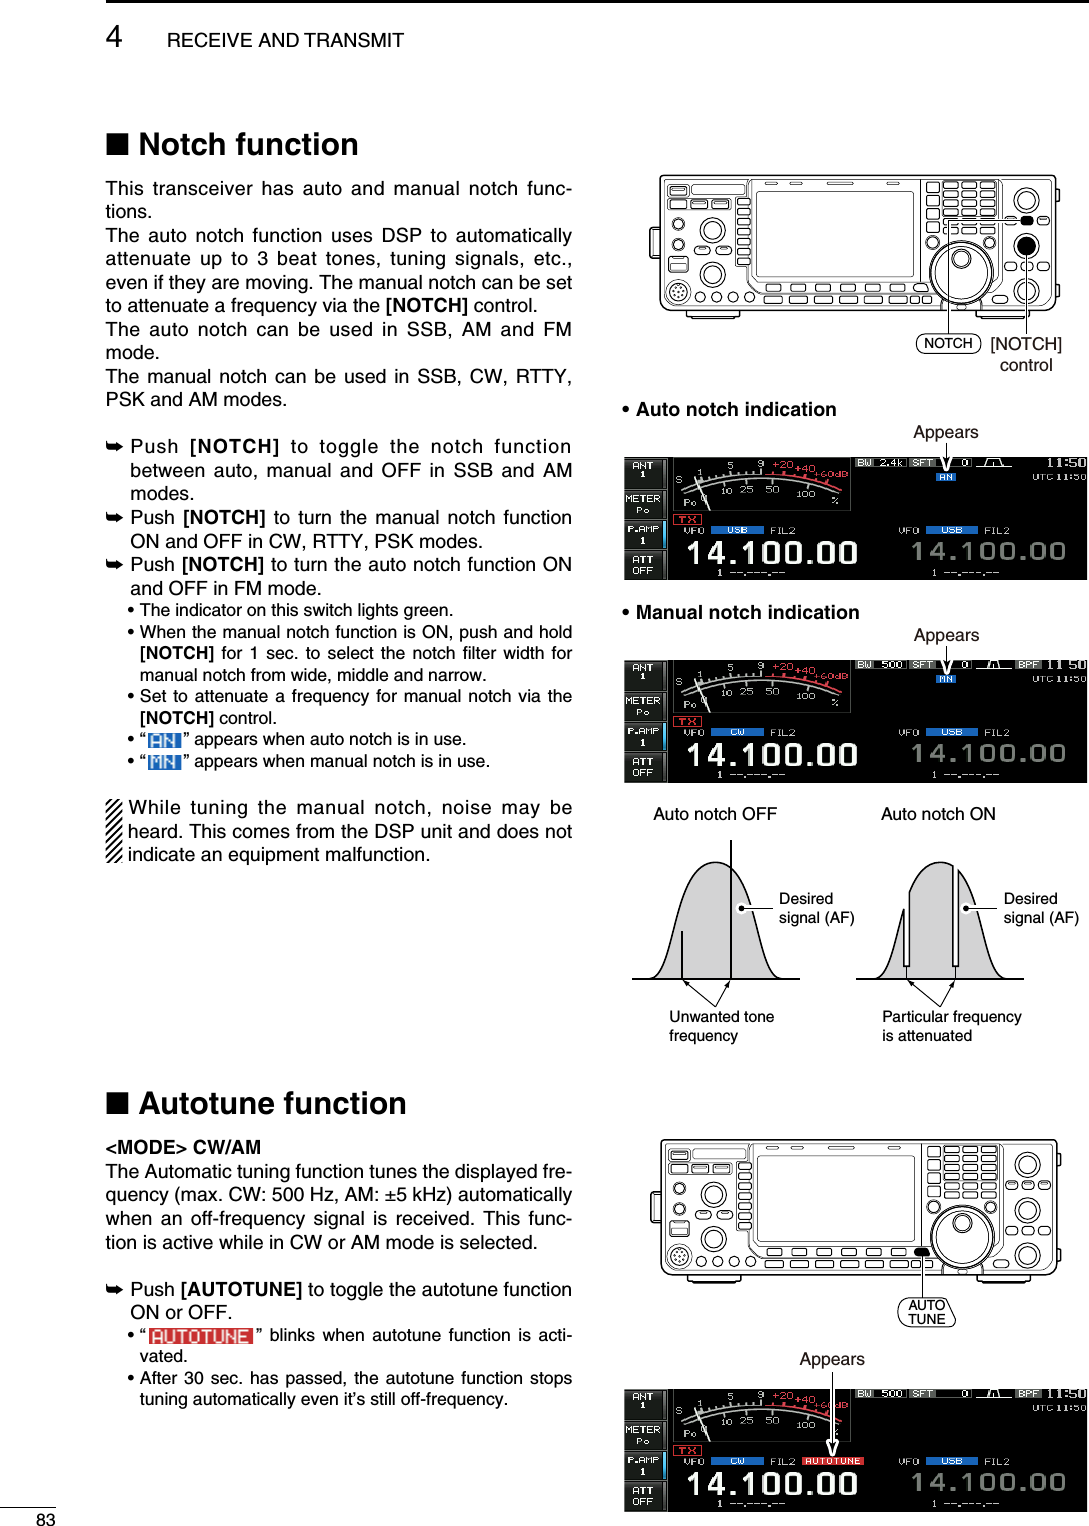 N Notch functionThis transceiver has auto and manual notch func-tions.The auto notch function uses DSP to automatically attenuate up to 3 beat tones, tuning signals, etc., even if they are moving. The manual notch can be set to attenuate a frequency via the [NOTCH] control.The auto notch can be used in SSB, AM and FM mode.The manual notch can be used in SSB, CW, RTTY, PSK and AM modes.±   Push  [NOTCH] to toggle the notch function between auto, manual and OFF in SSB and AM modes.±  Push  [NOTCH] to turn the manual notch function ON and OFF in CW, RTTY, PSK modes.±  Push [NOTCH] to turn the auto notch function ON and OFF in FM mode. •  The indicator on this switch lights green. •  When the manual notch function is ON, push and hold [NOTCH] for 1 sec. to select the notch filter width for manual notch from wide, middle and narrow. •  Set to attenuate a frequency for manual notch via the [NOTCH] control. • “   ” appears when auto notch is in use. • “   ” appears when manual notch is in use.While tuning the manual notch, noise may be heard. This comes from the DSP unit and does not indicate an equipment malfunction.N Autotune function&lt;MODE&gt; CW/AMThe Automatic tuning function tunes the displayed fre-quency (max. CW: 500 Hz, AM: ±5 kHz) automatically when an off-frequency signal is received. This func-tion is active while in CW or AM mode is selected. ±  Push [AUTOTUNE] to toggle the autotune function ON or OFF. •  “    ” blinks when autotune function is acti-vated. •  After 30 sec. has passed, the autotune function stops tuning automatically even it’s still off-frequency.[NOTCH]controlNOTCH• Auto notch indicationAppears• Manual notch indicationAppearsUnwanted tone frequencyDesired signal (AF)Desired signal (AF)Particular frequencyis attenuatedAuto notch OFF Auto notch ONAUTOTUNEAppears834RECEIVE AND TRANSMIT